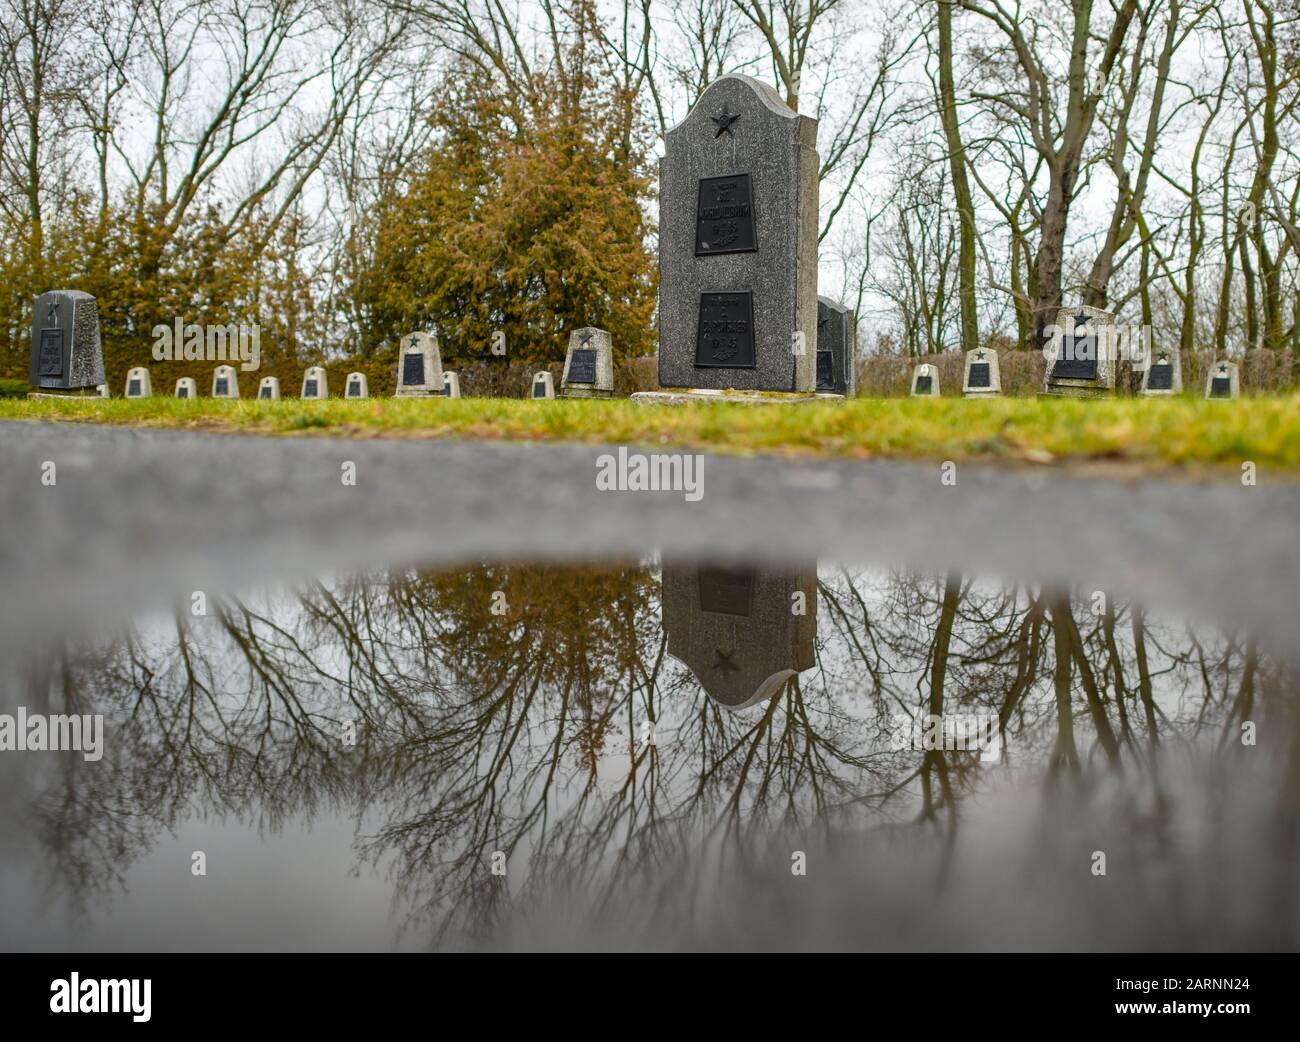 Seelow, Germany. 29th Jan, 2020. Grave and memorial stones are reflected in a puddle on the grounds of the Seelower Höhen memorial site. Shortly before the end of the Second World War, tens of thousands of soldiers and civilians died in the Battle of Seelower Heights east of Berlin in the largest battle of the Second World War on German soil. Credit: Patrick Pleul/dpa-Zentralbild/ZB/dpa/Alamy Live News Stock Photo